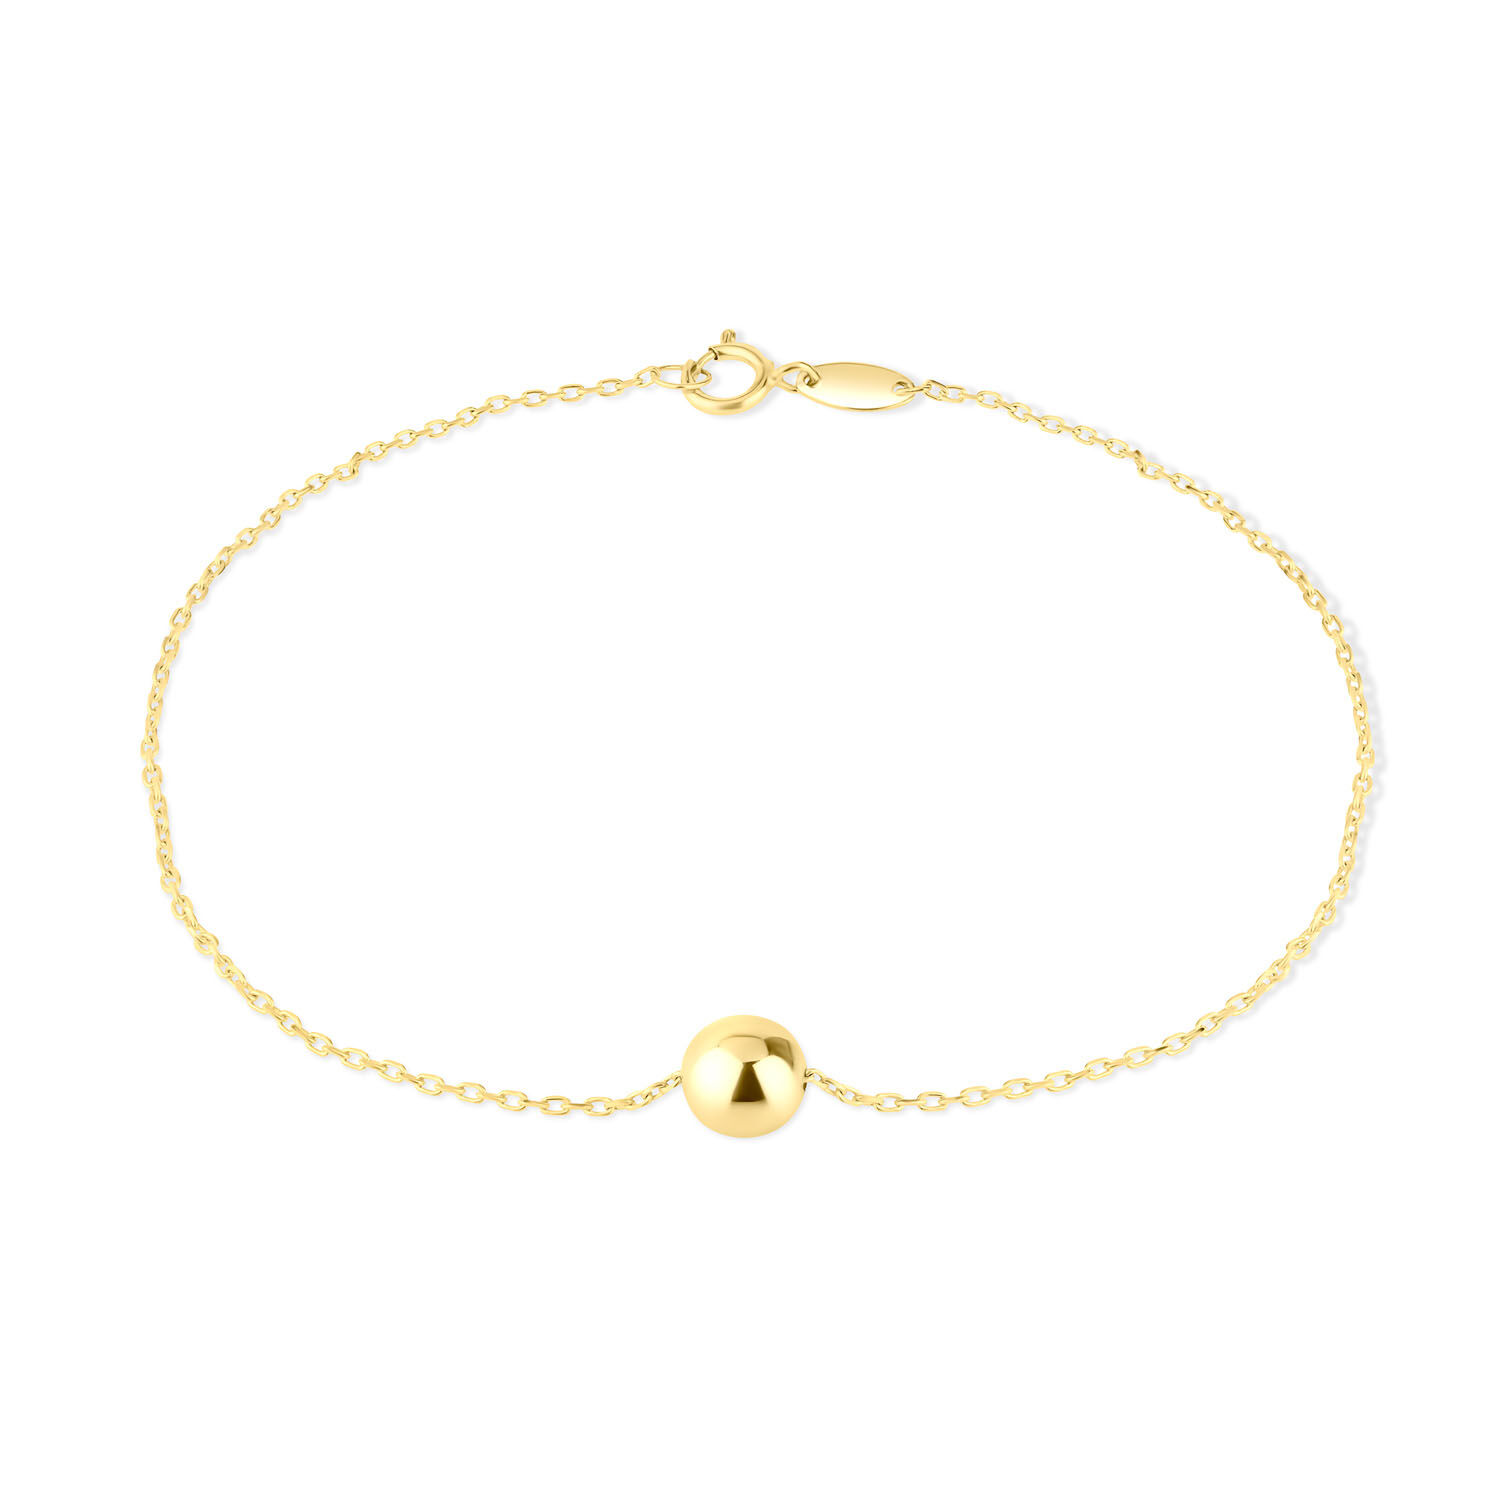 Smiths Jewellers Nottingham - 9ct Gold Ladies Roller Ball Bracelet. £449.00  Made From Solid 9ct Gold. Weighing 22 Grams. 7.5 Inches Long. 9ct Gold  ladies Diamond Hook Bangle. £299.00 Made From Solid